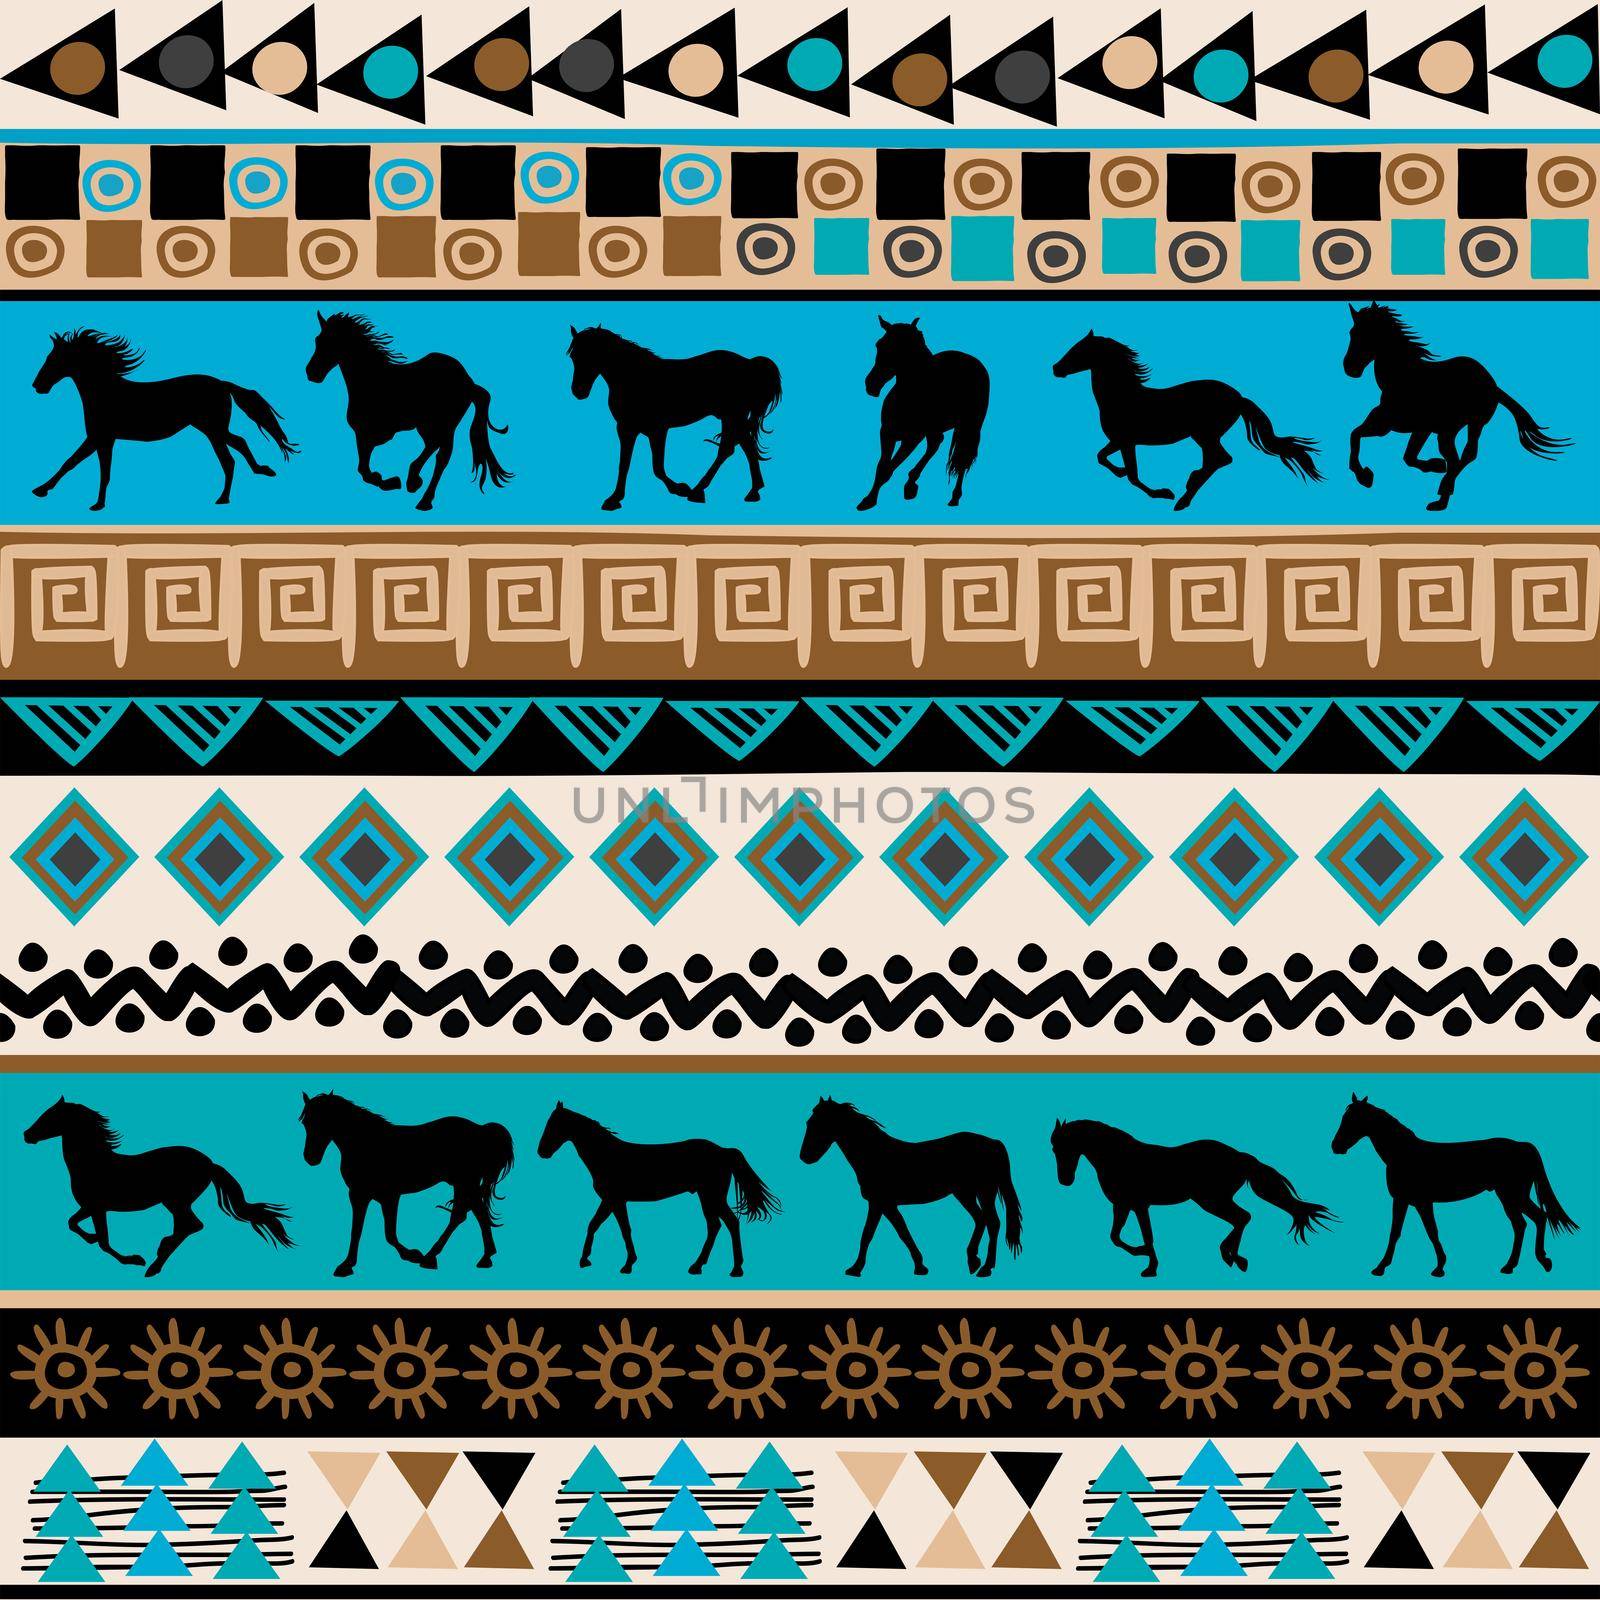 Tribal ethnic pattern with horses silhouettes and traditional symbols by hibrida13